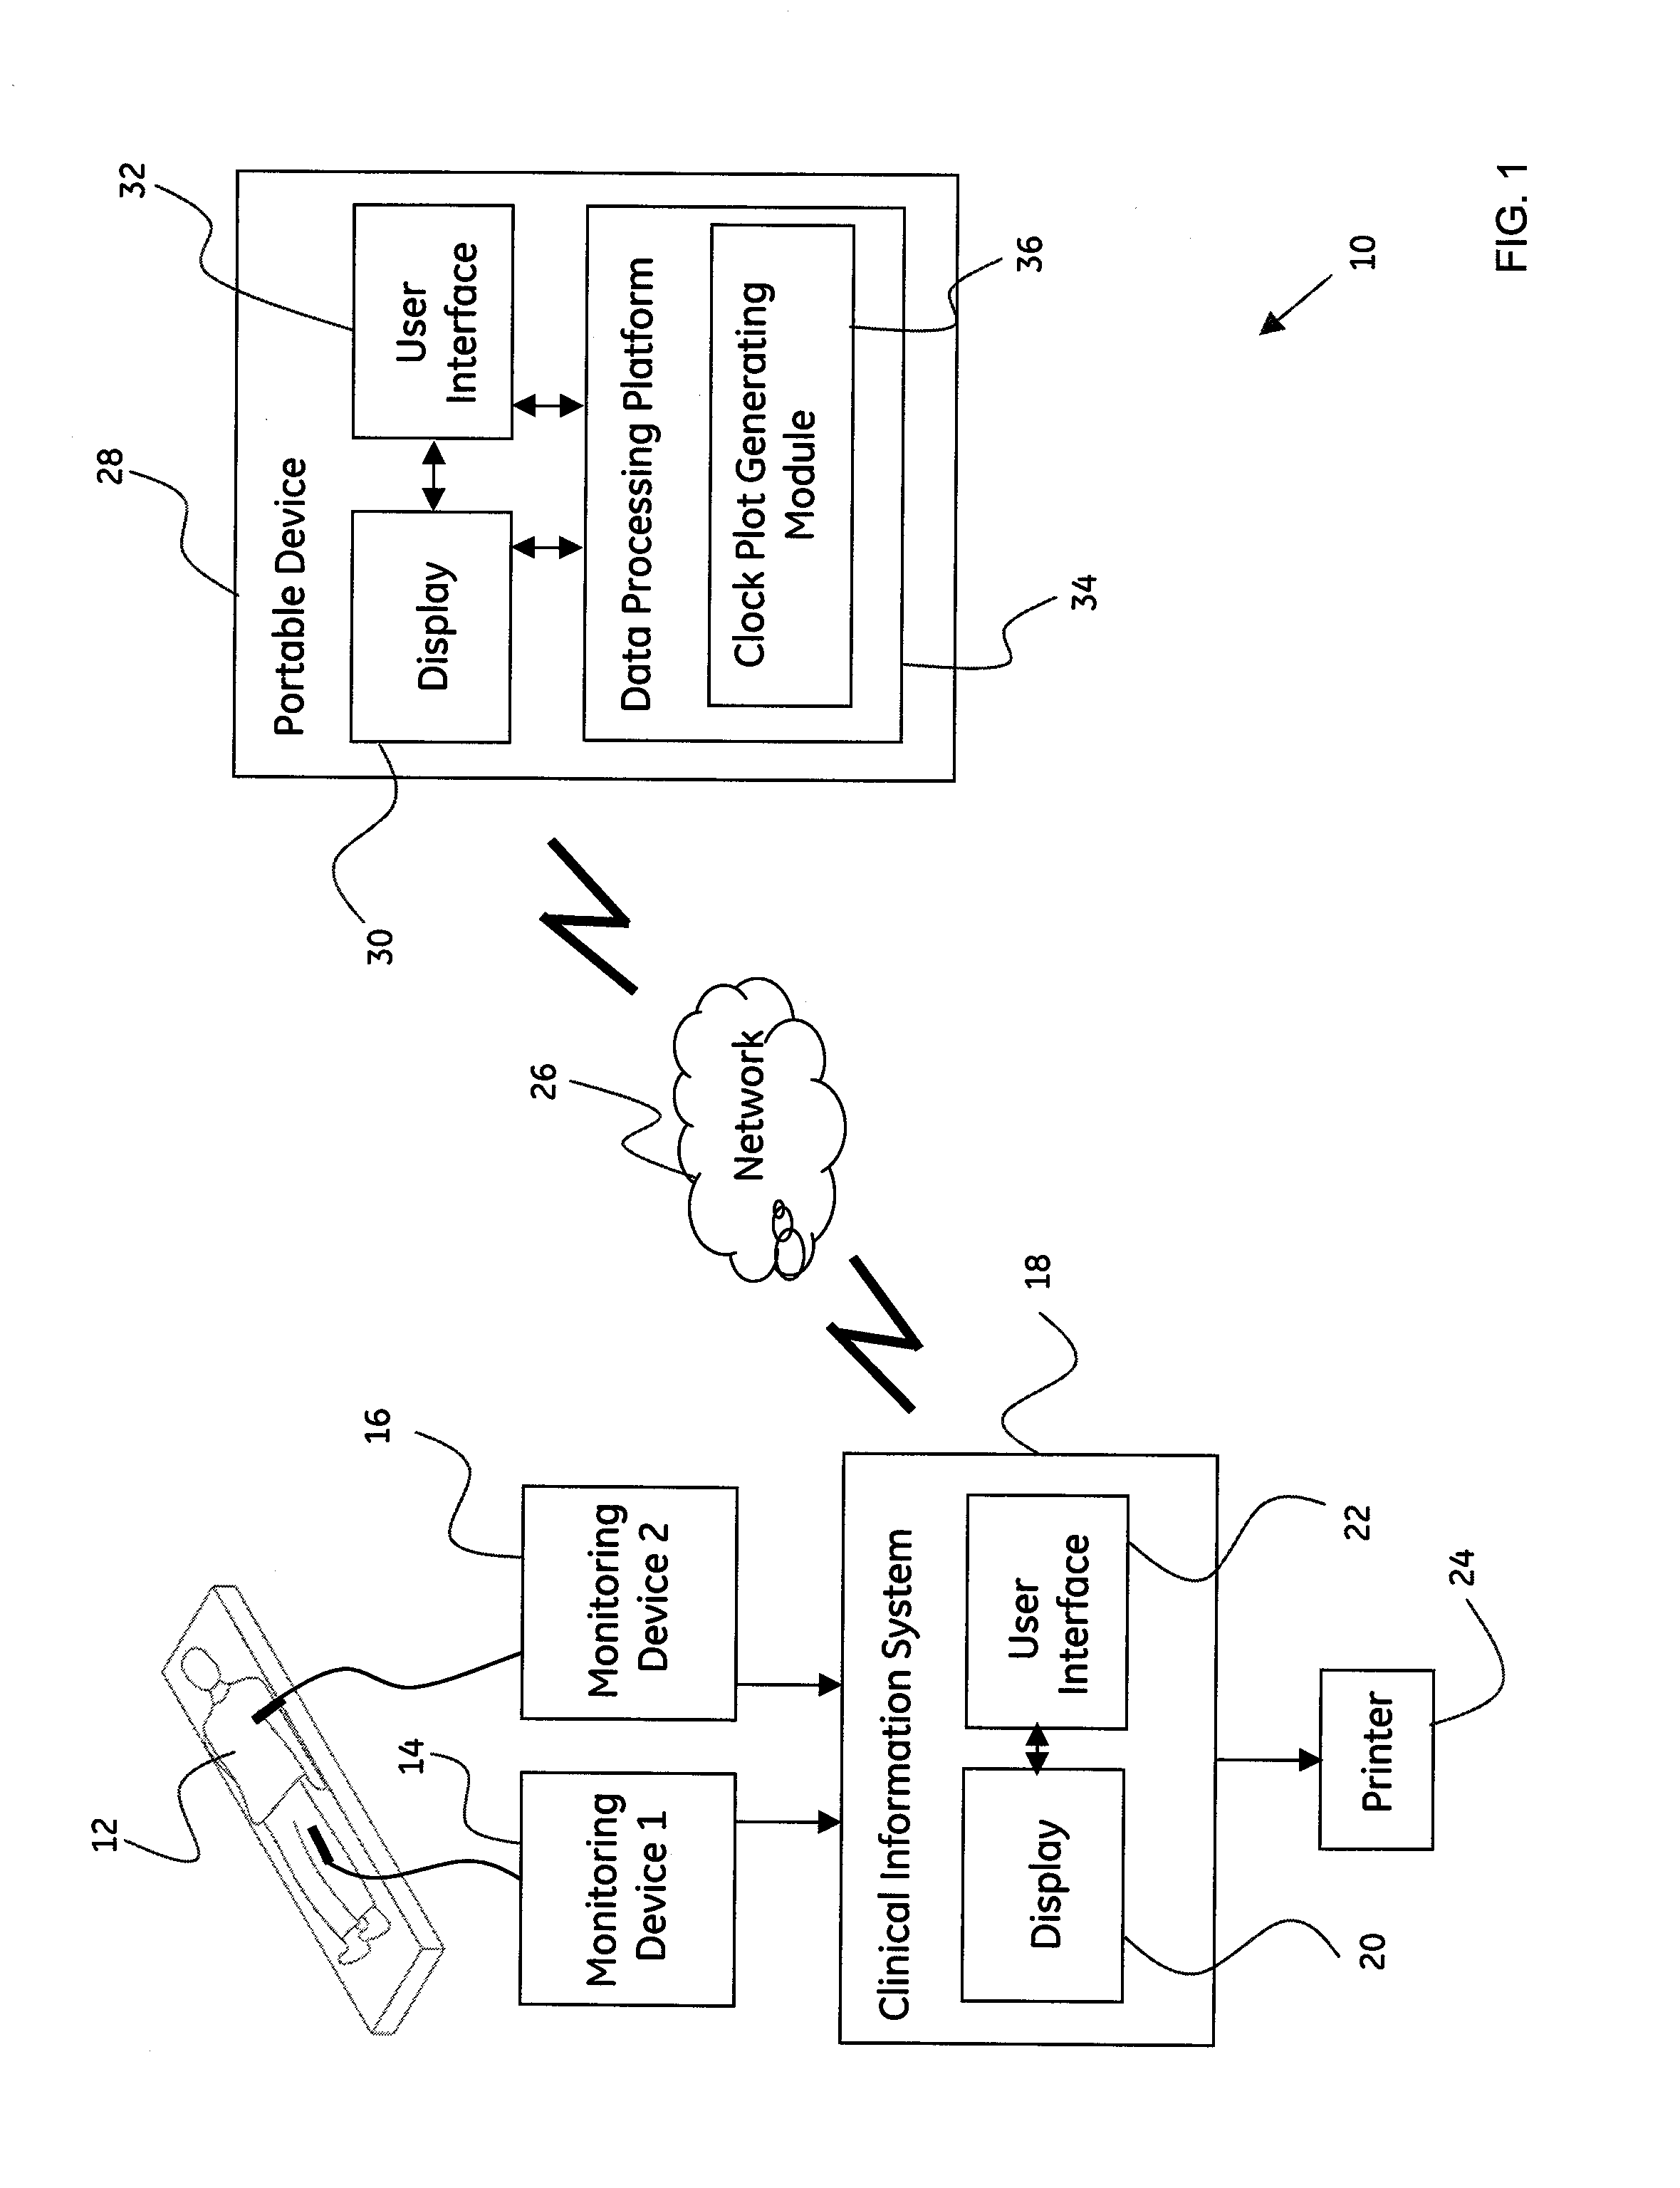 Method and system for enhanced display of temporal data on portable devices